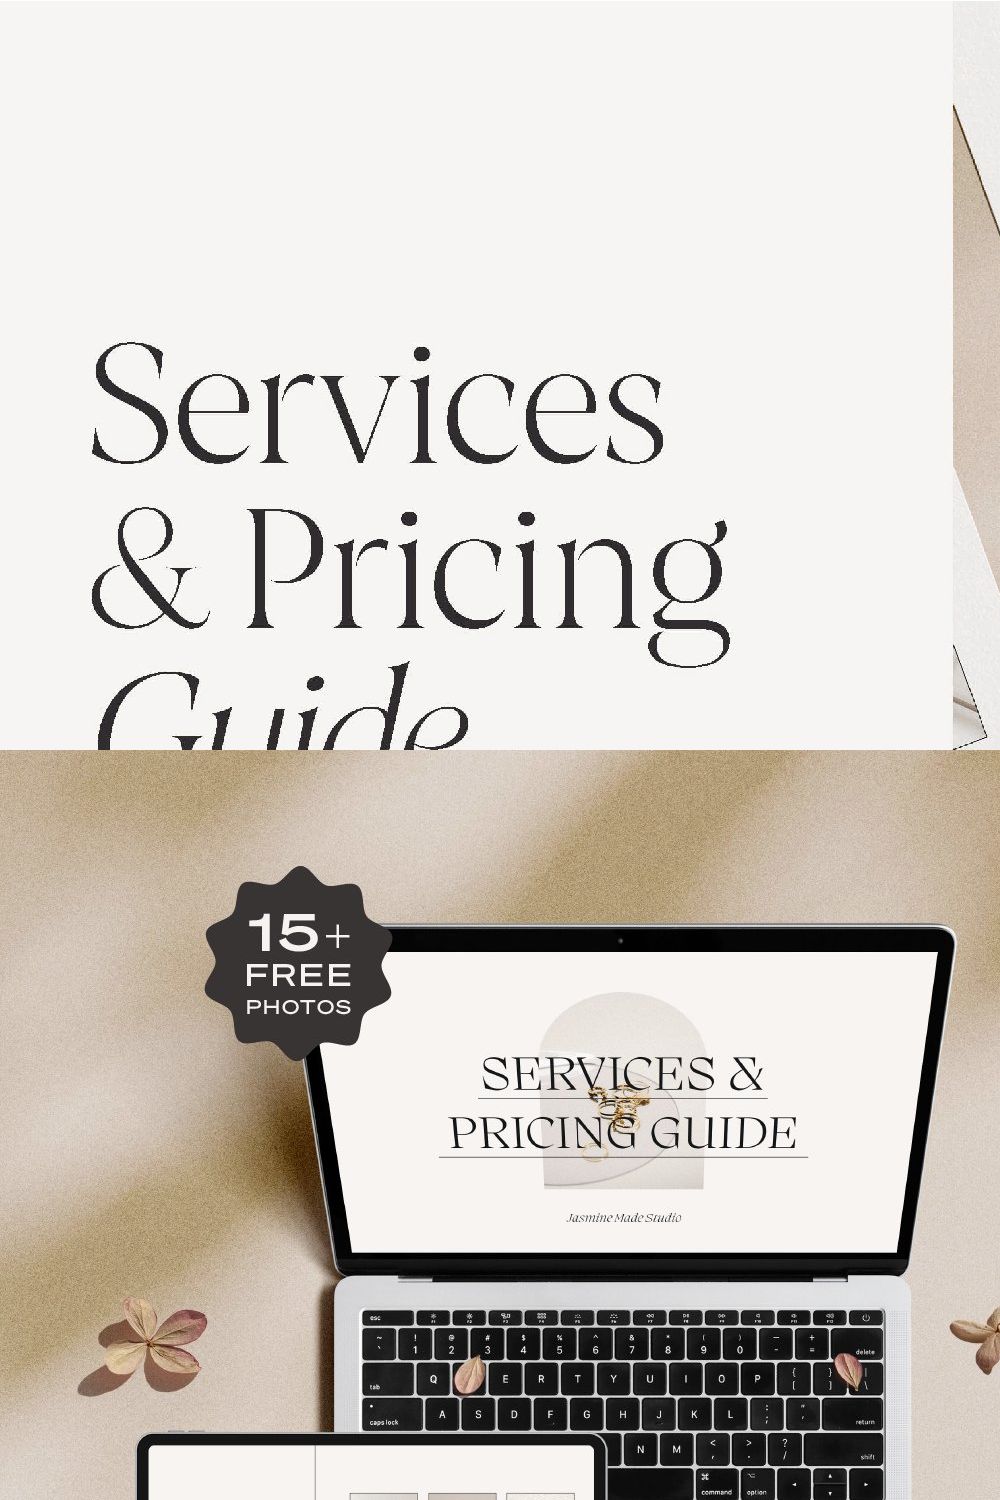 Services & Pricing Guide pinterest preview image.